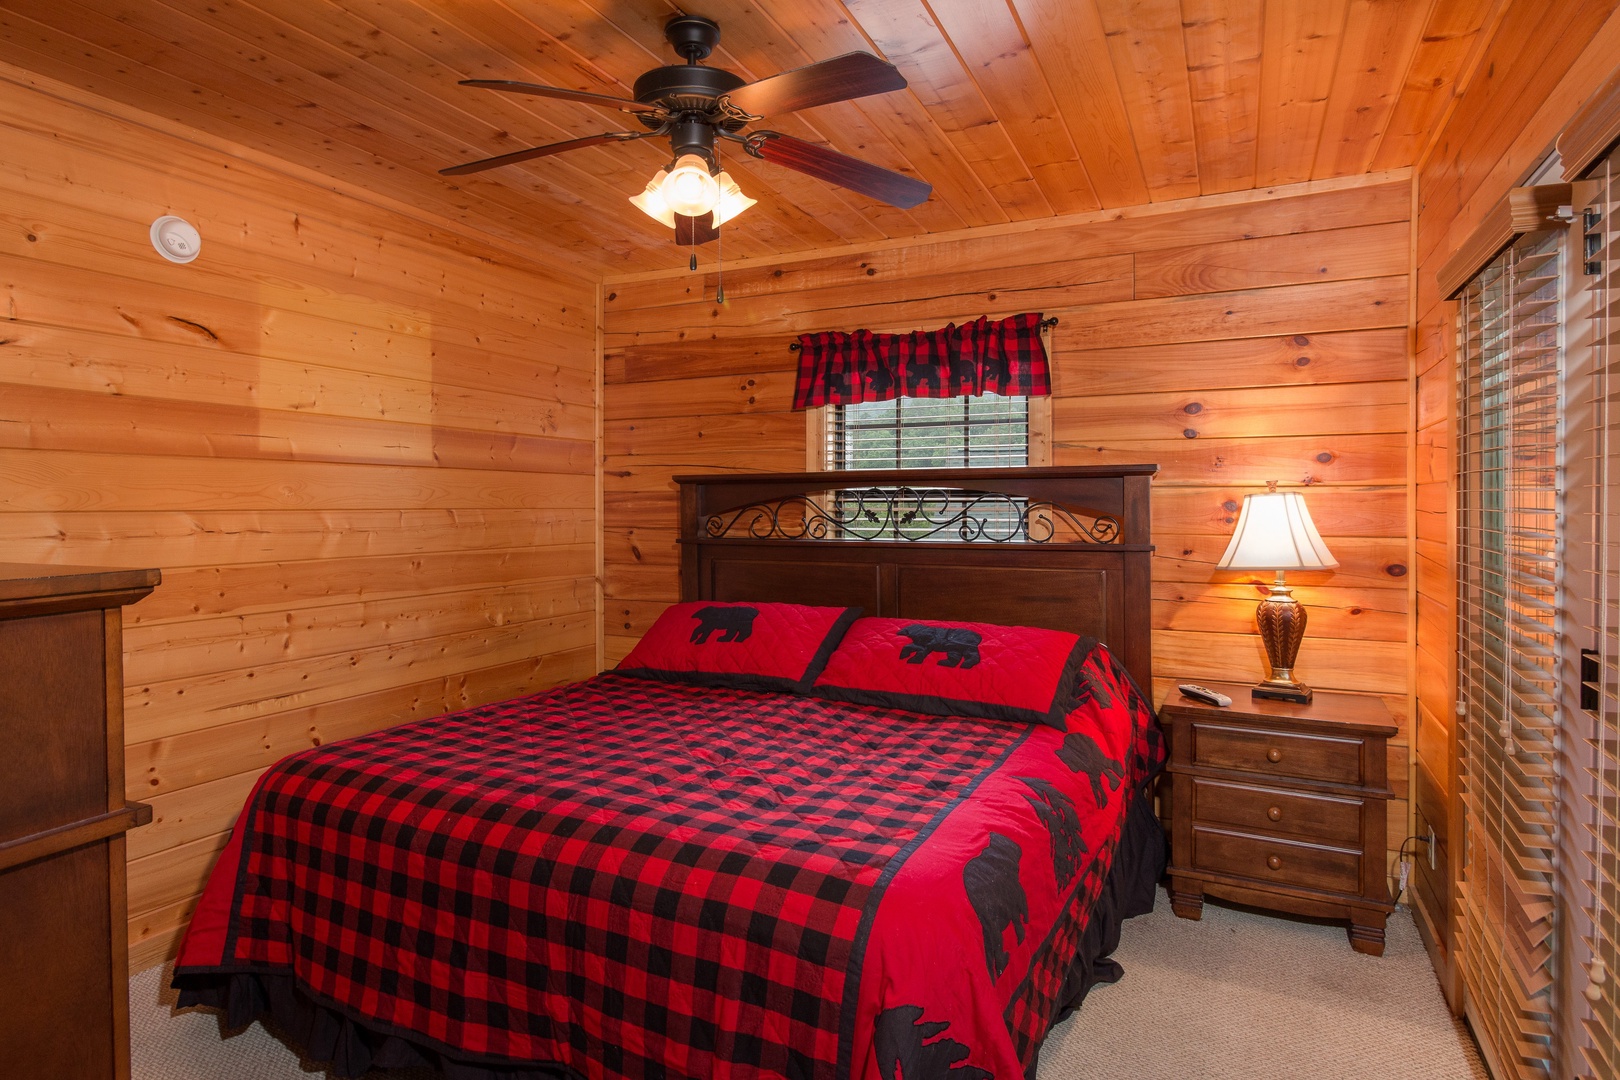 Bedroom at Family Ties Lodge, a 4 bedroom cabin rental located in pigeon forge